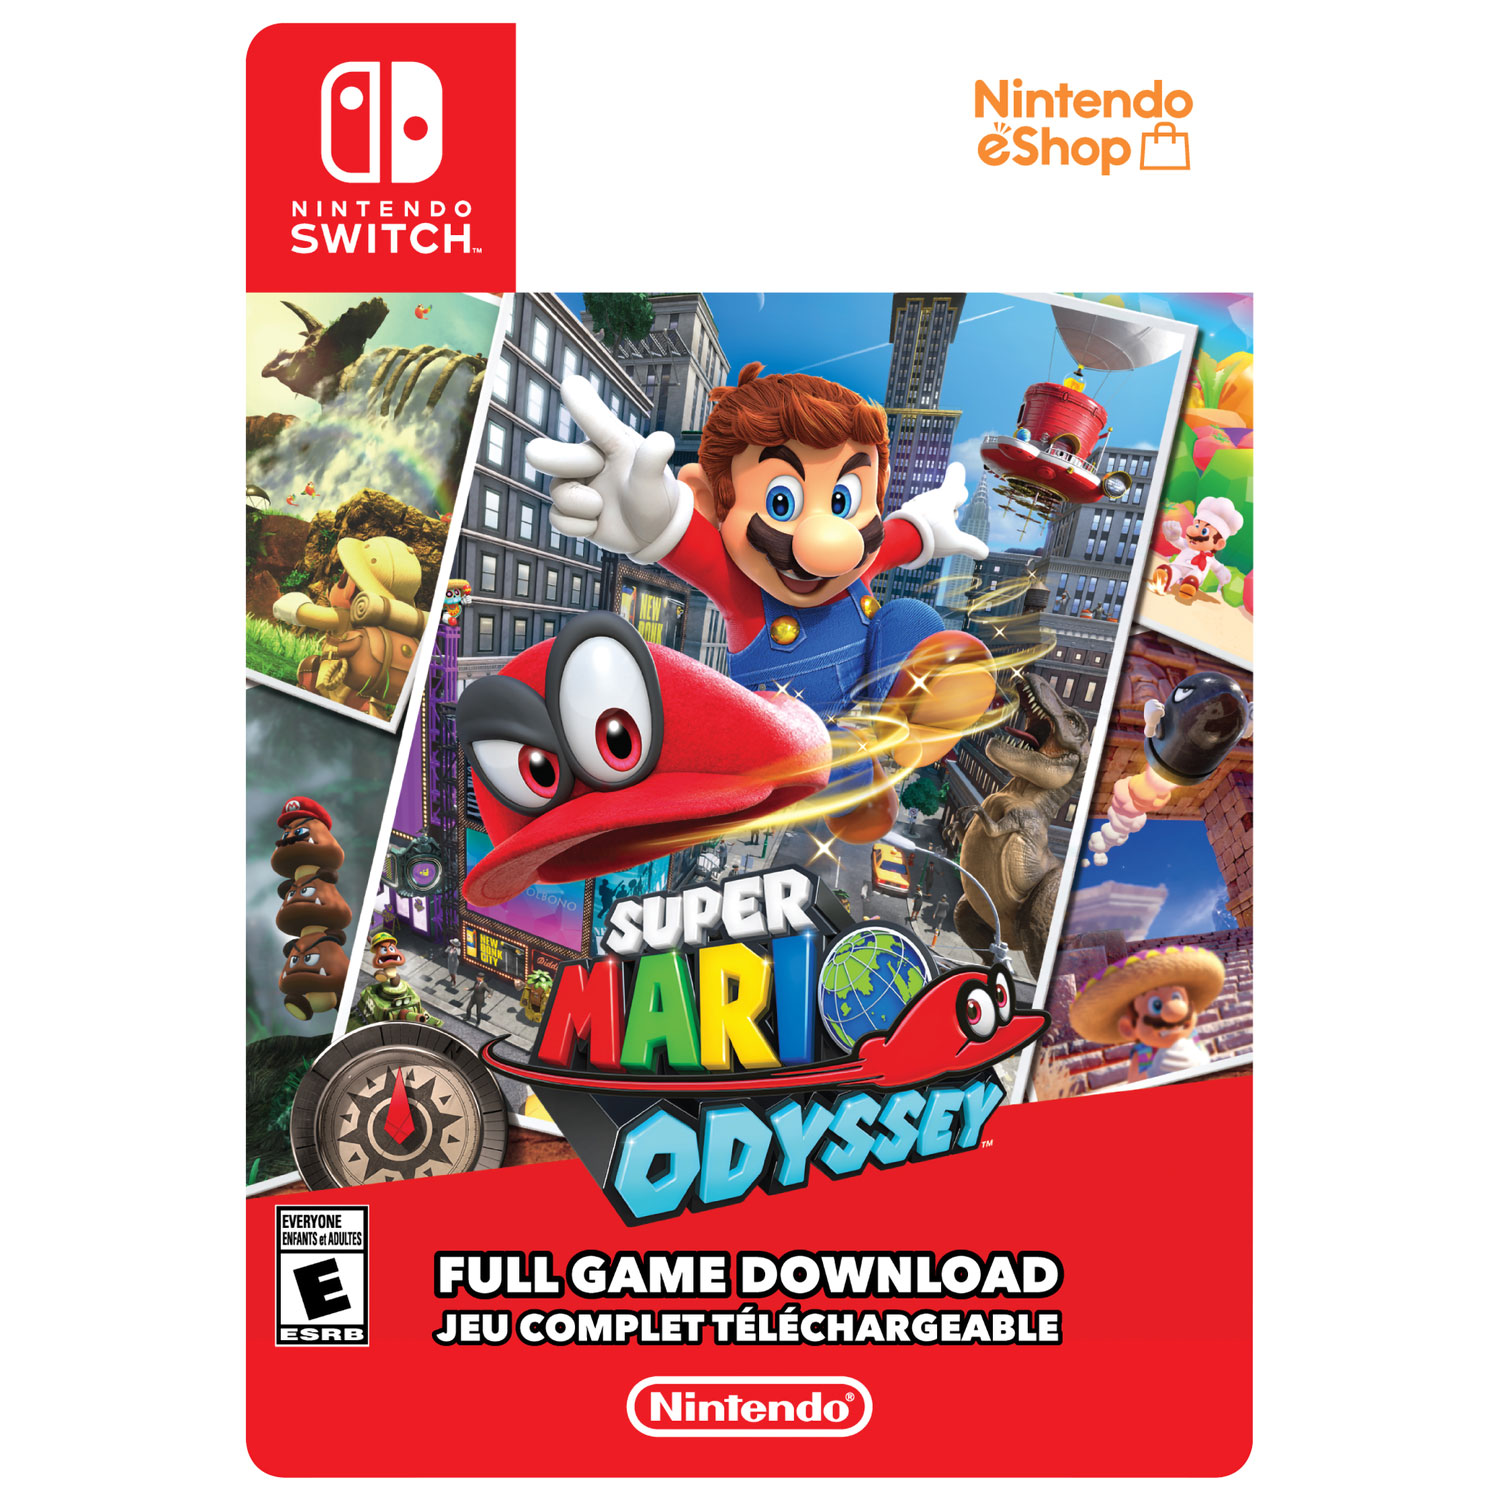 Super Mario Odyssey Nintendo Switch - Where to Buy at the Best Price in ...